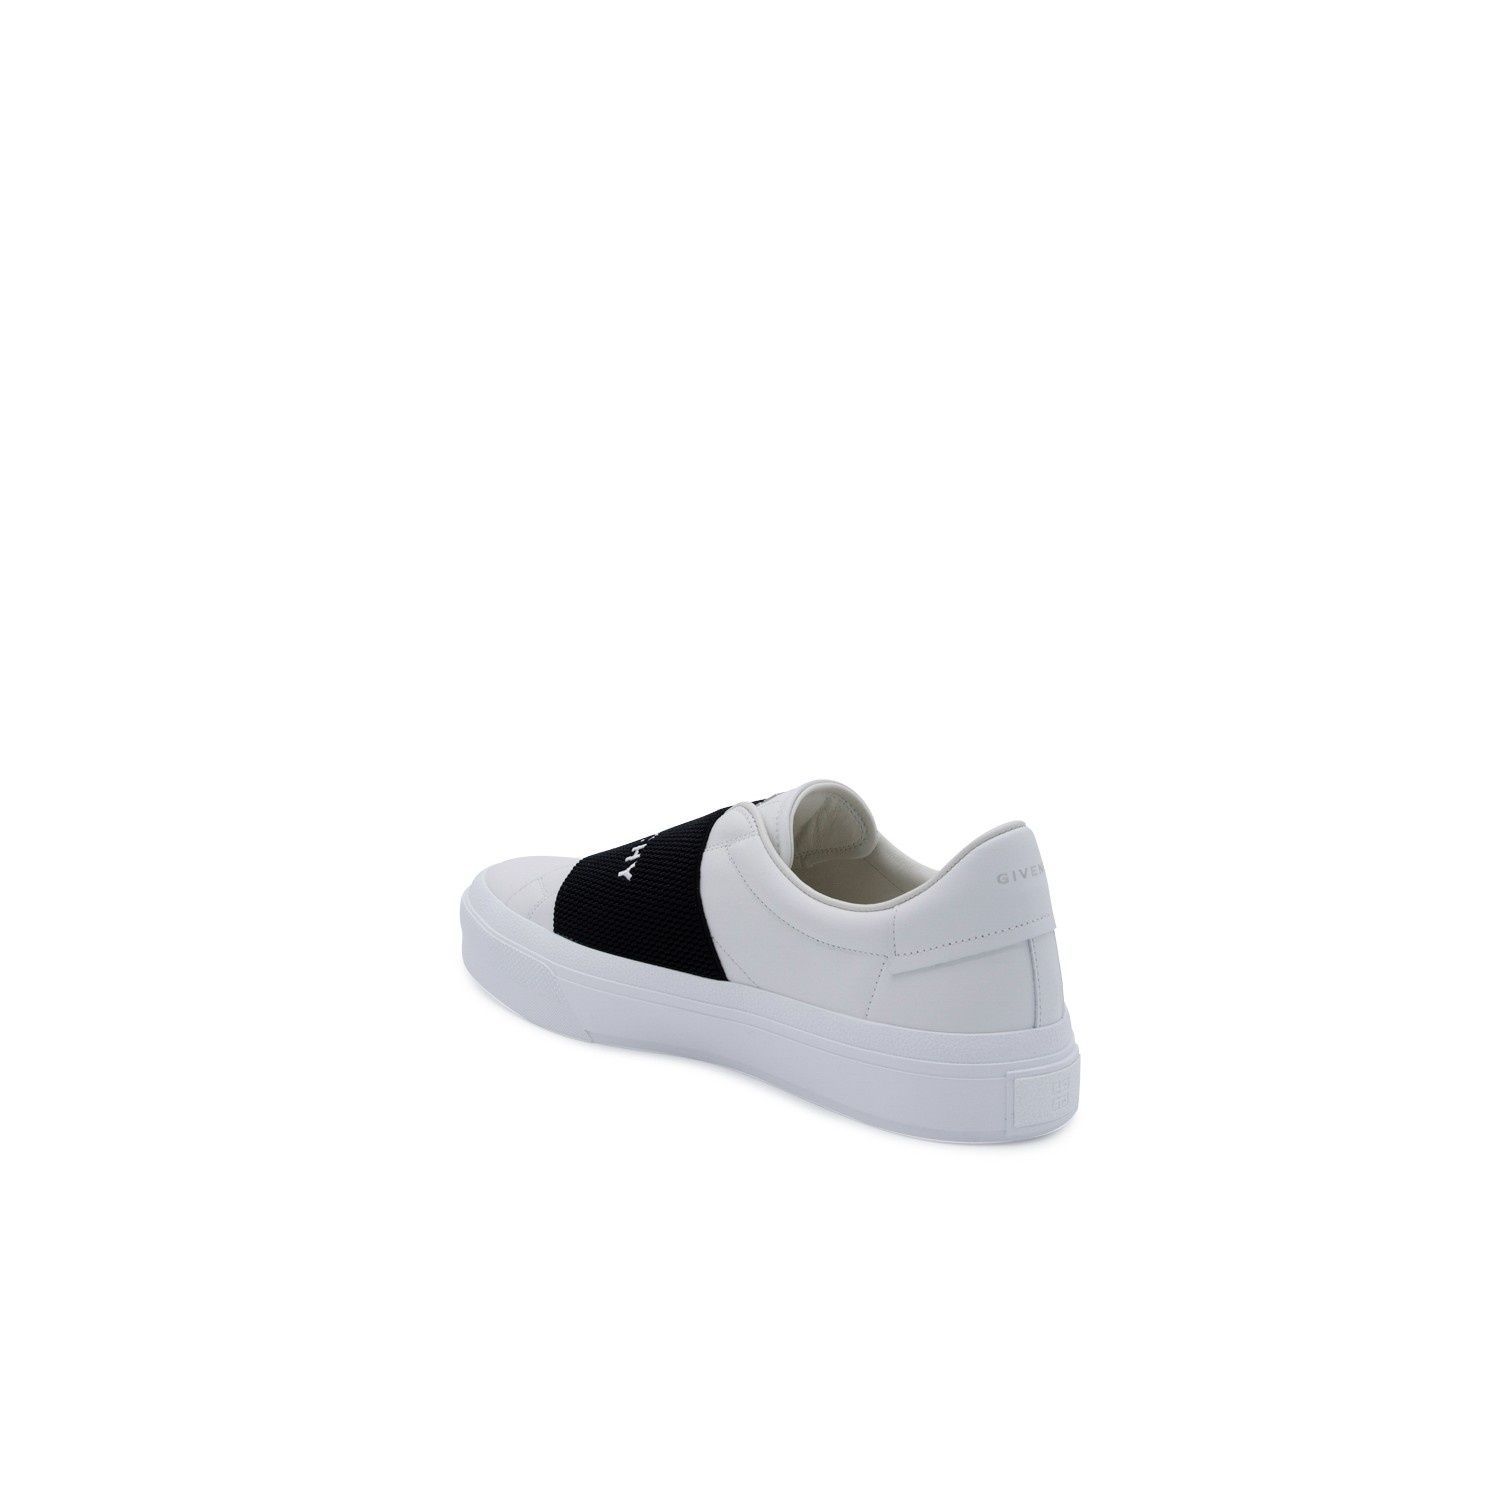 WHITE AND BLACK LEATHER CITY SPORT LOW TOP SNEAKERS - 3